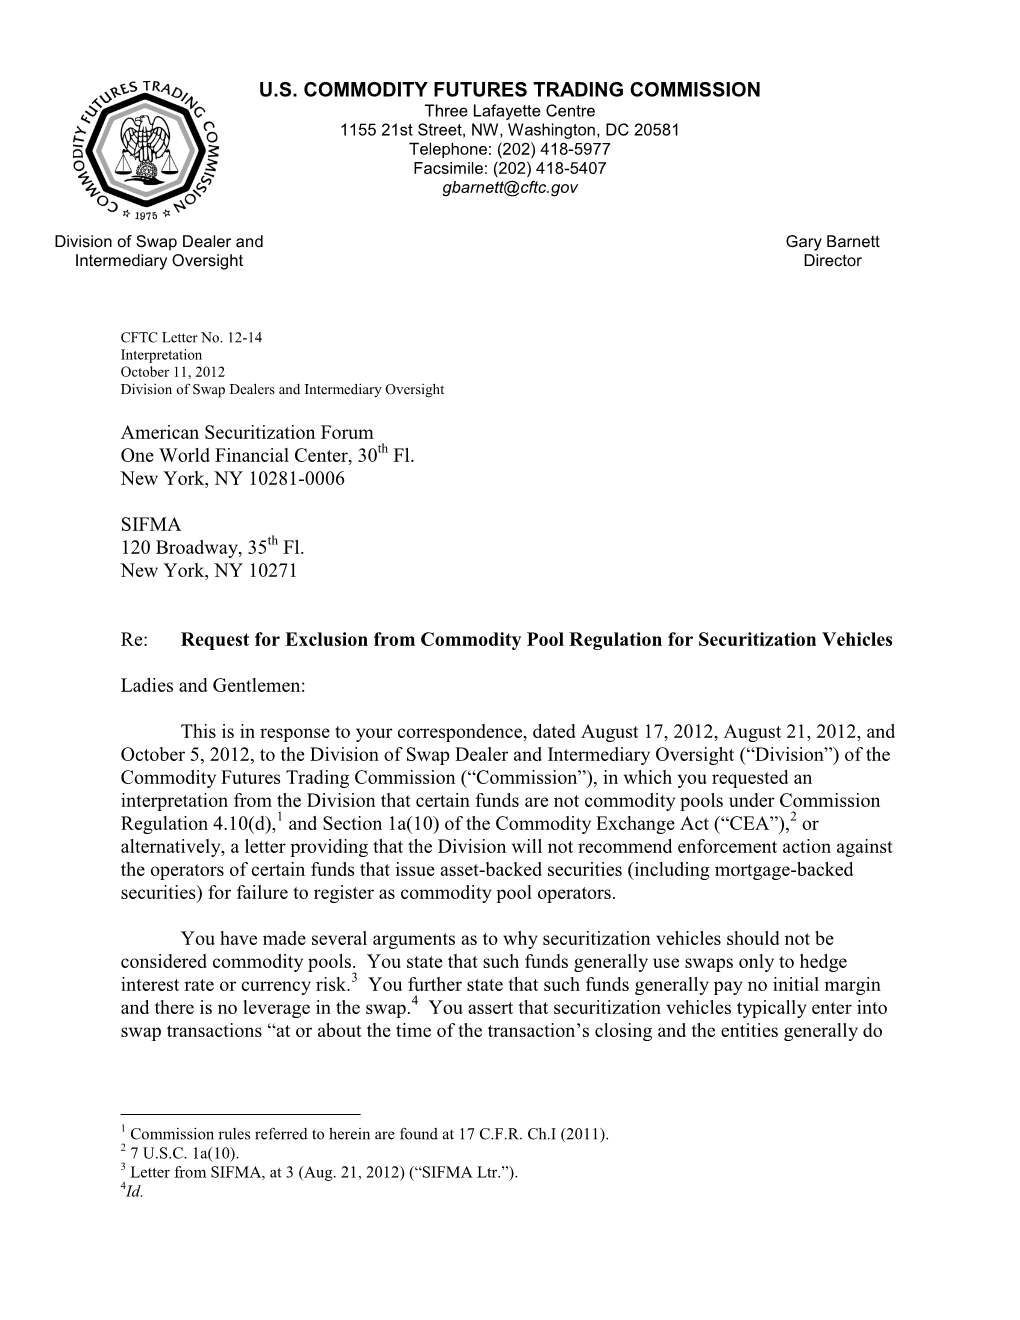 CFTC Letter No. 12-14 Interpretation October 11, 2012 Division of Swap Dealers and Intermediary Oversight